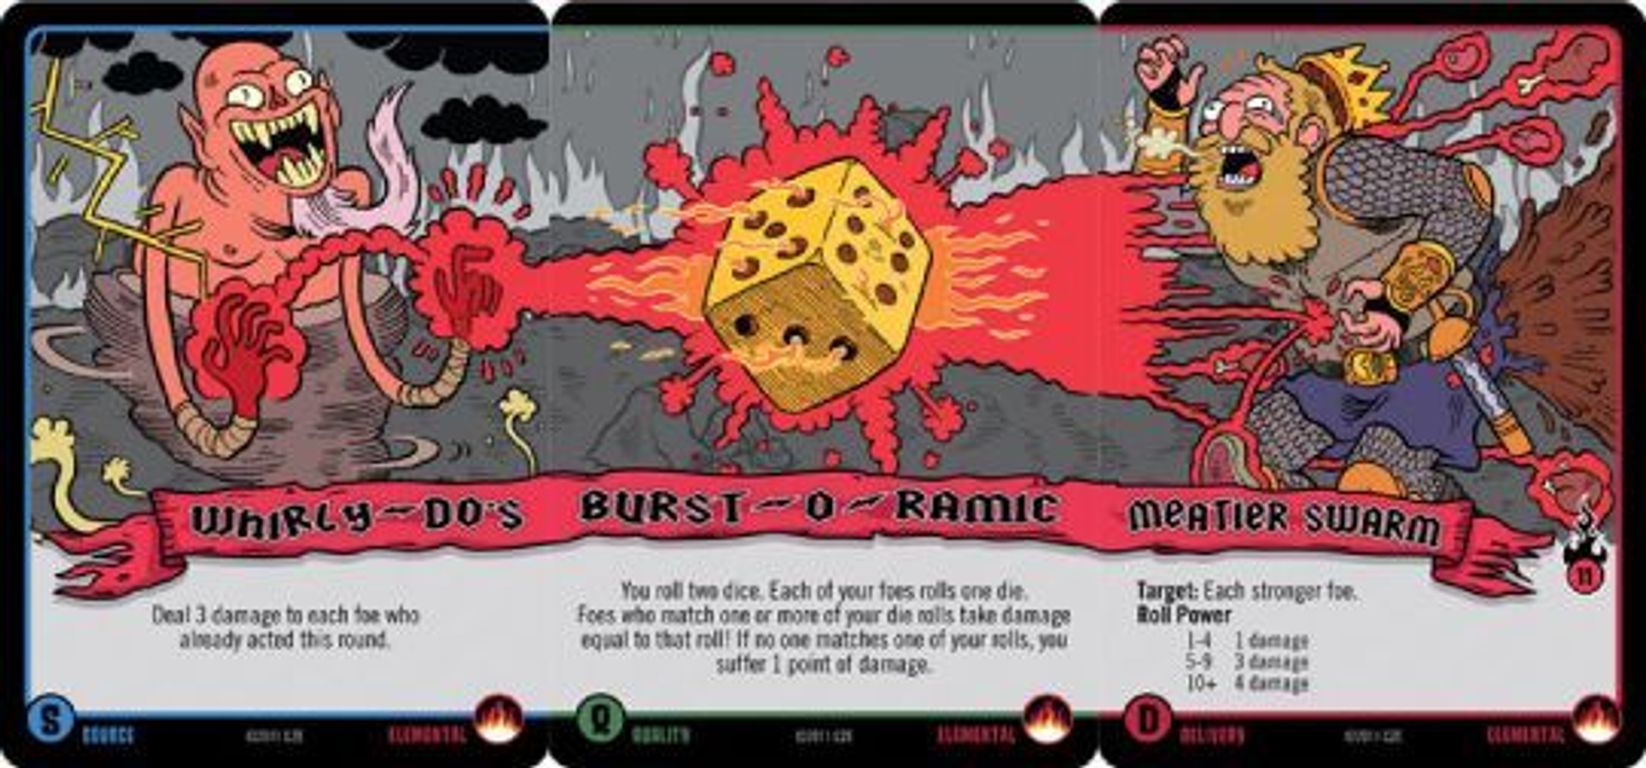 Epic Spell Wars of the Battle Wizards: Duel at Mt. Skullzfyre cards